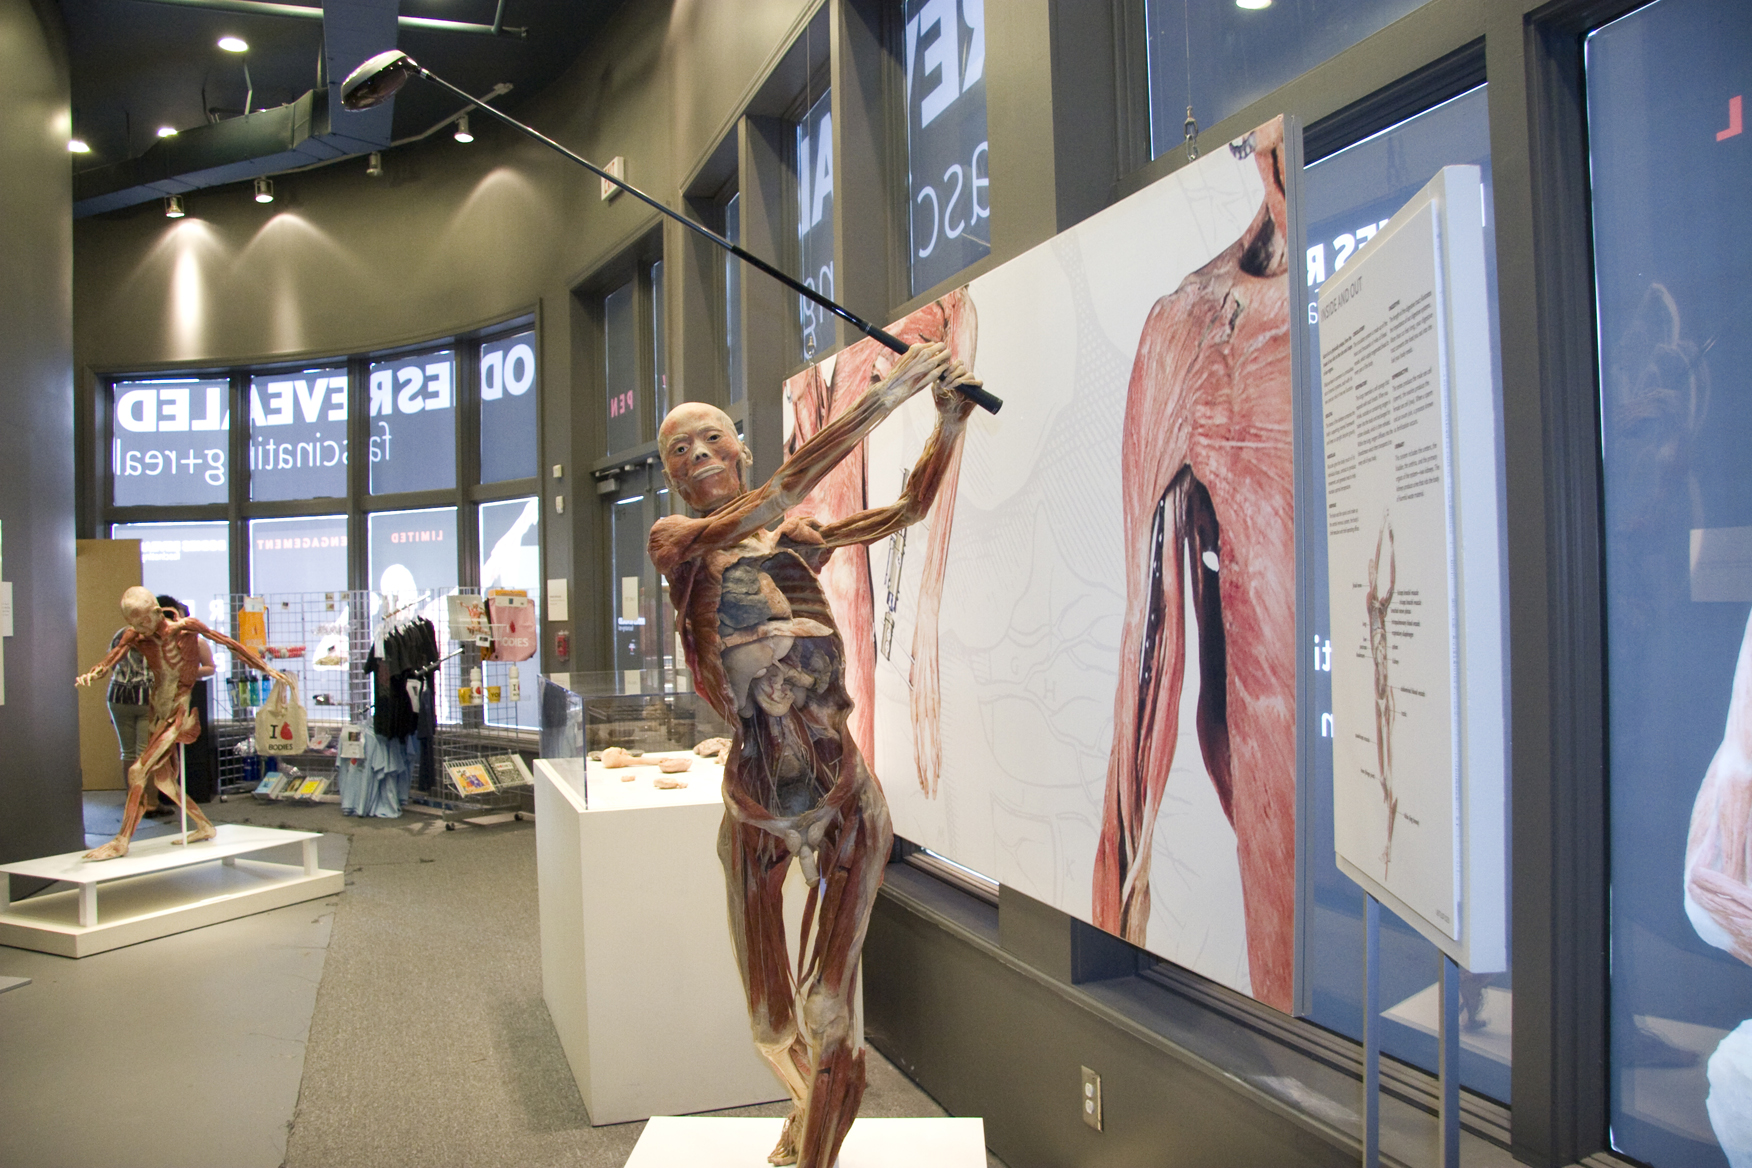 Bodies Revealed Exhibit in Myrtle Beach is Approaching the End of its